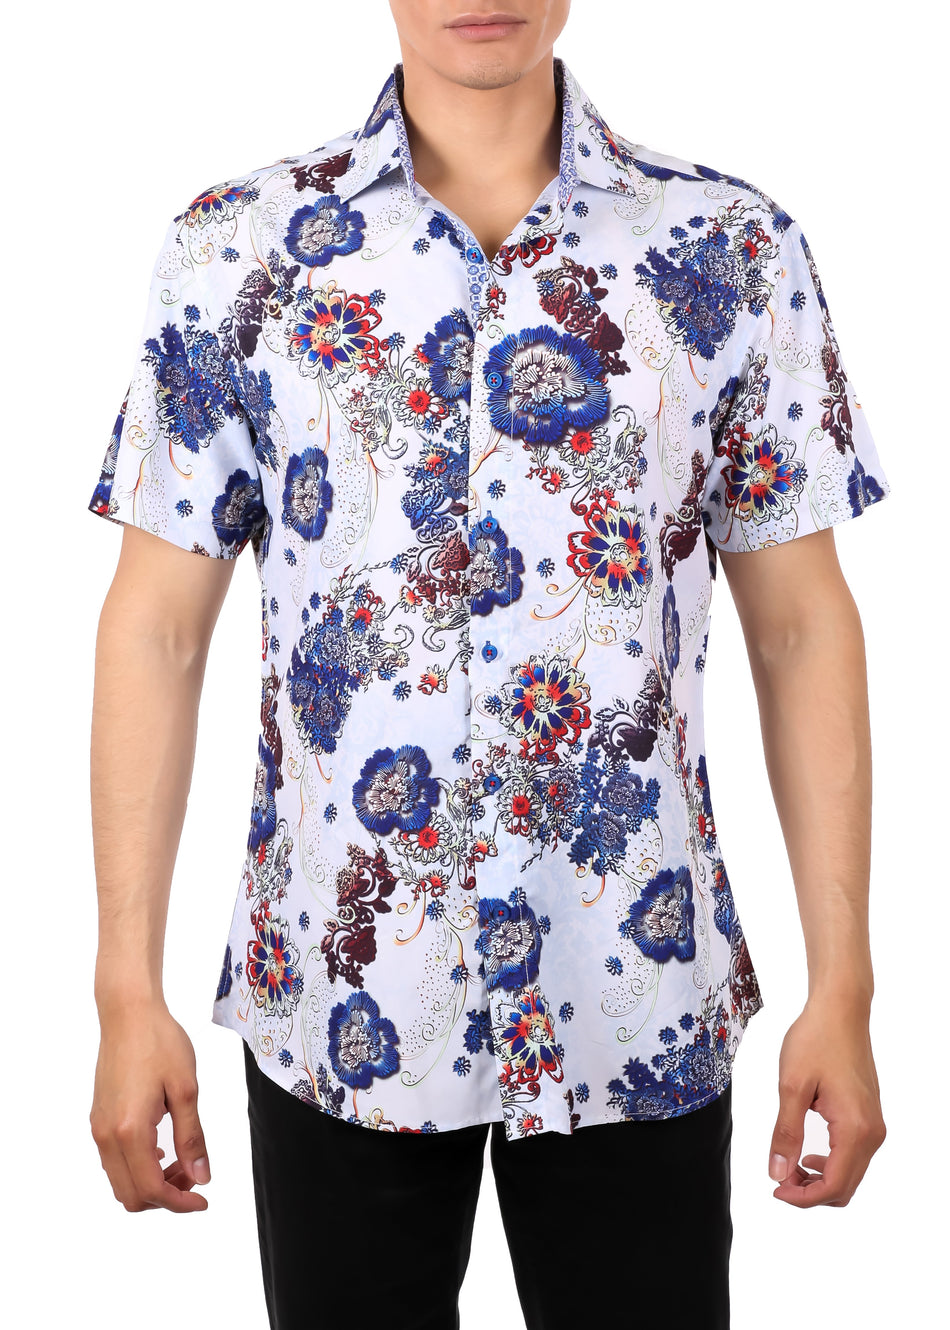 Abstract Floral Print Short Sleeve Dress Shirt White